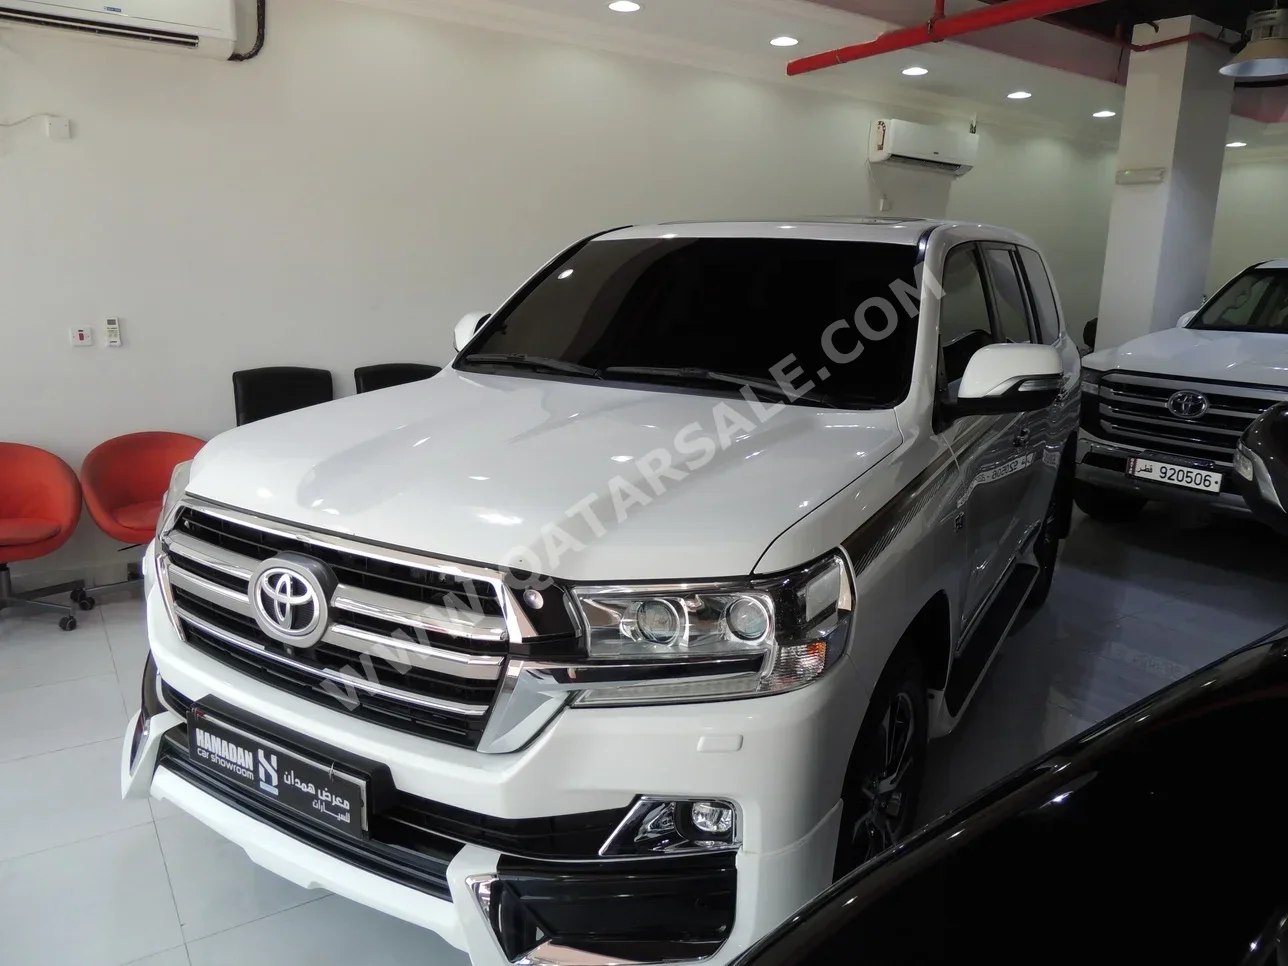 Toyota  Land Cruiser  VXR- Grand Touring S  2018  Automatic  141,000 Km  8 Cylinder  Four Wheel Drive (4WD)  SUV  White